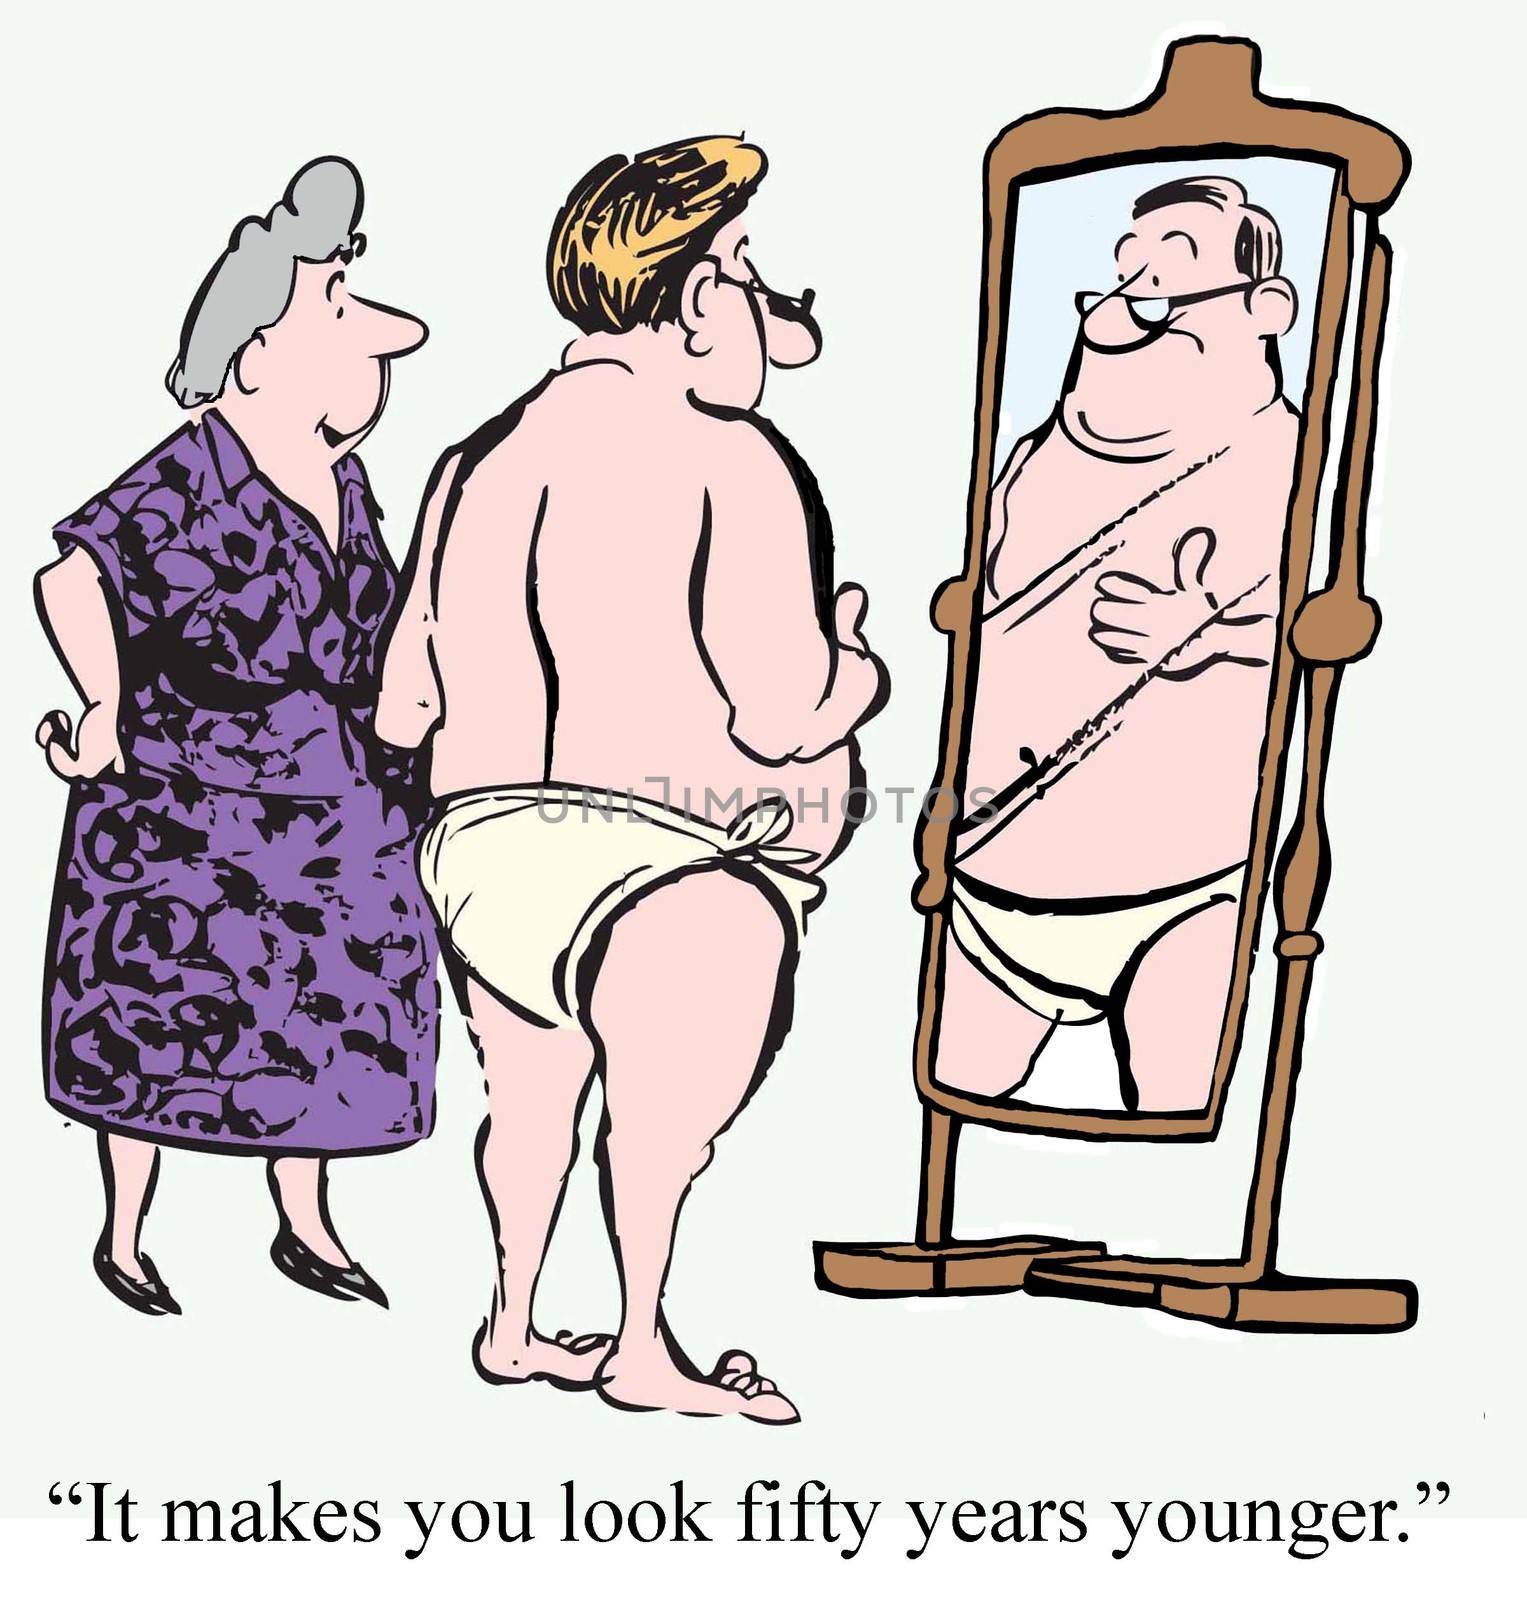 "It makes you look fifty years younger."